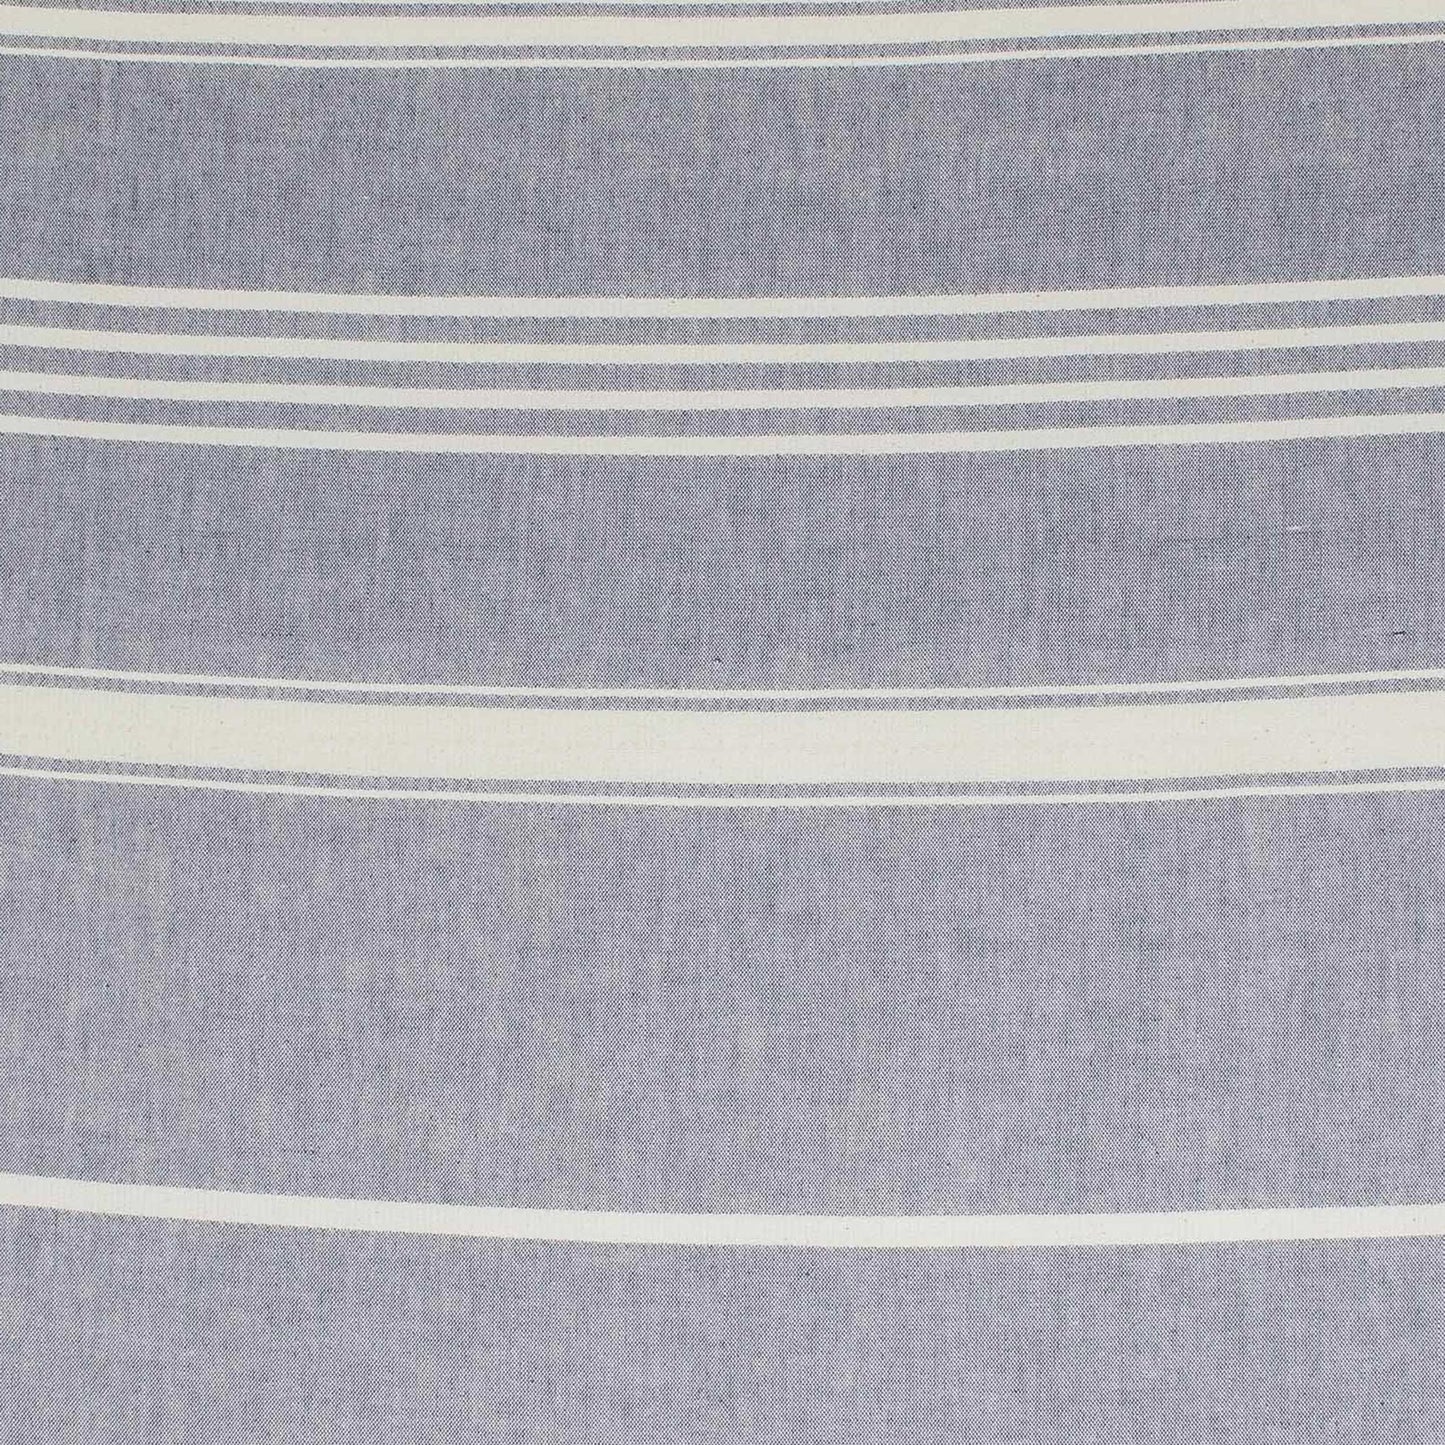 Fresh Relaxation in Cadet Blue Striped Cotton Beach Towel in Cadet Blue from Guatemala